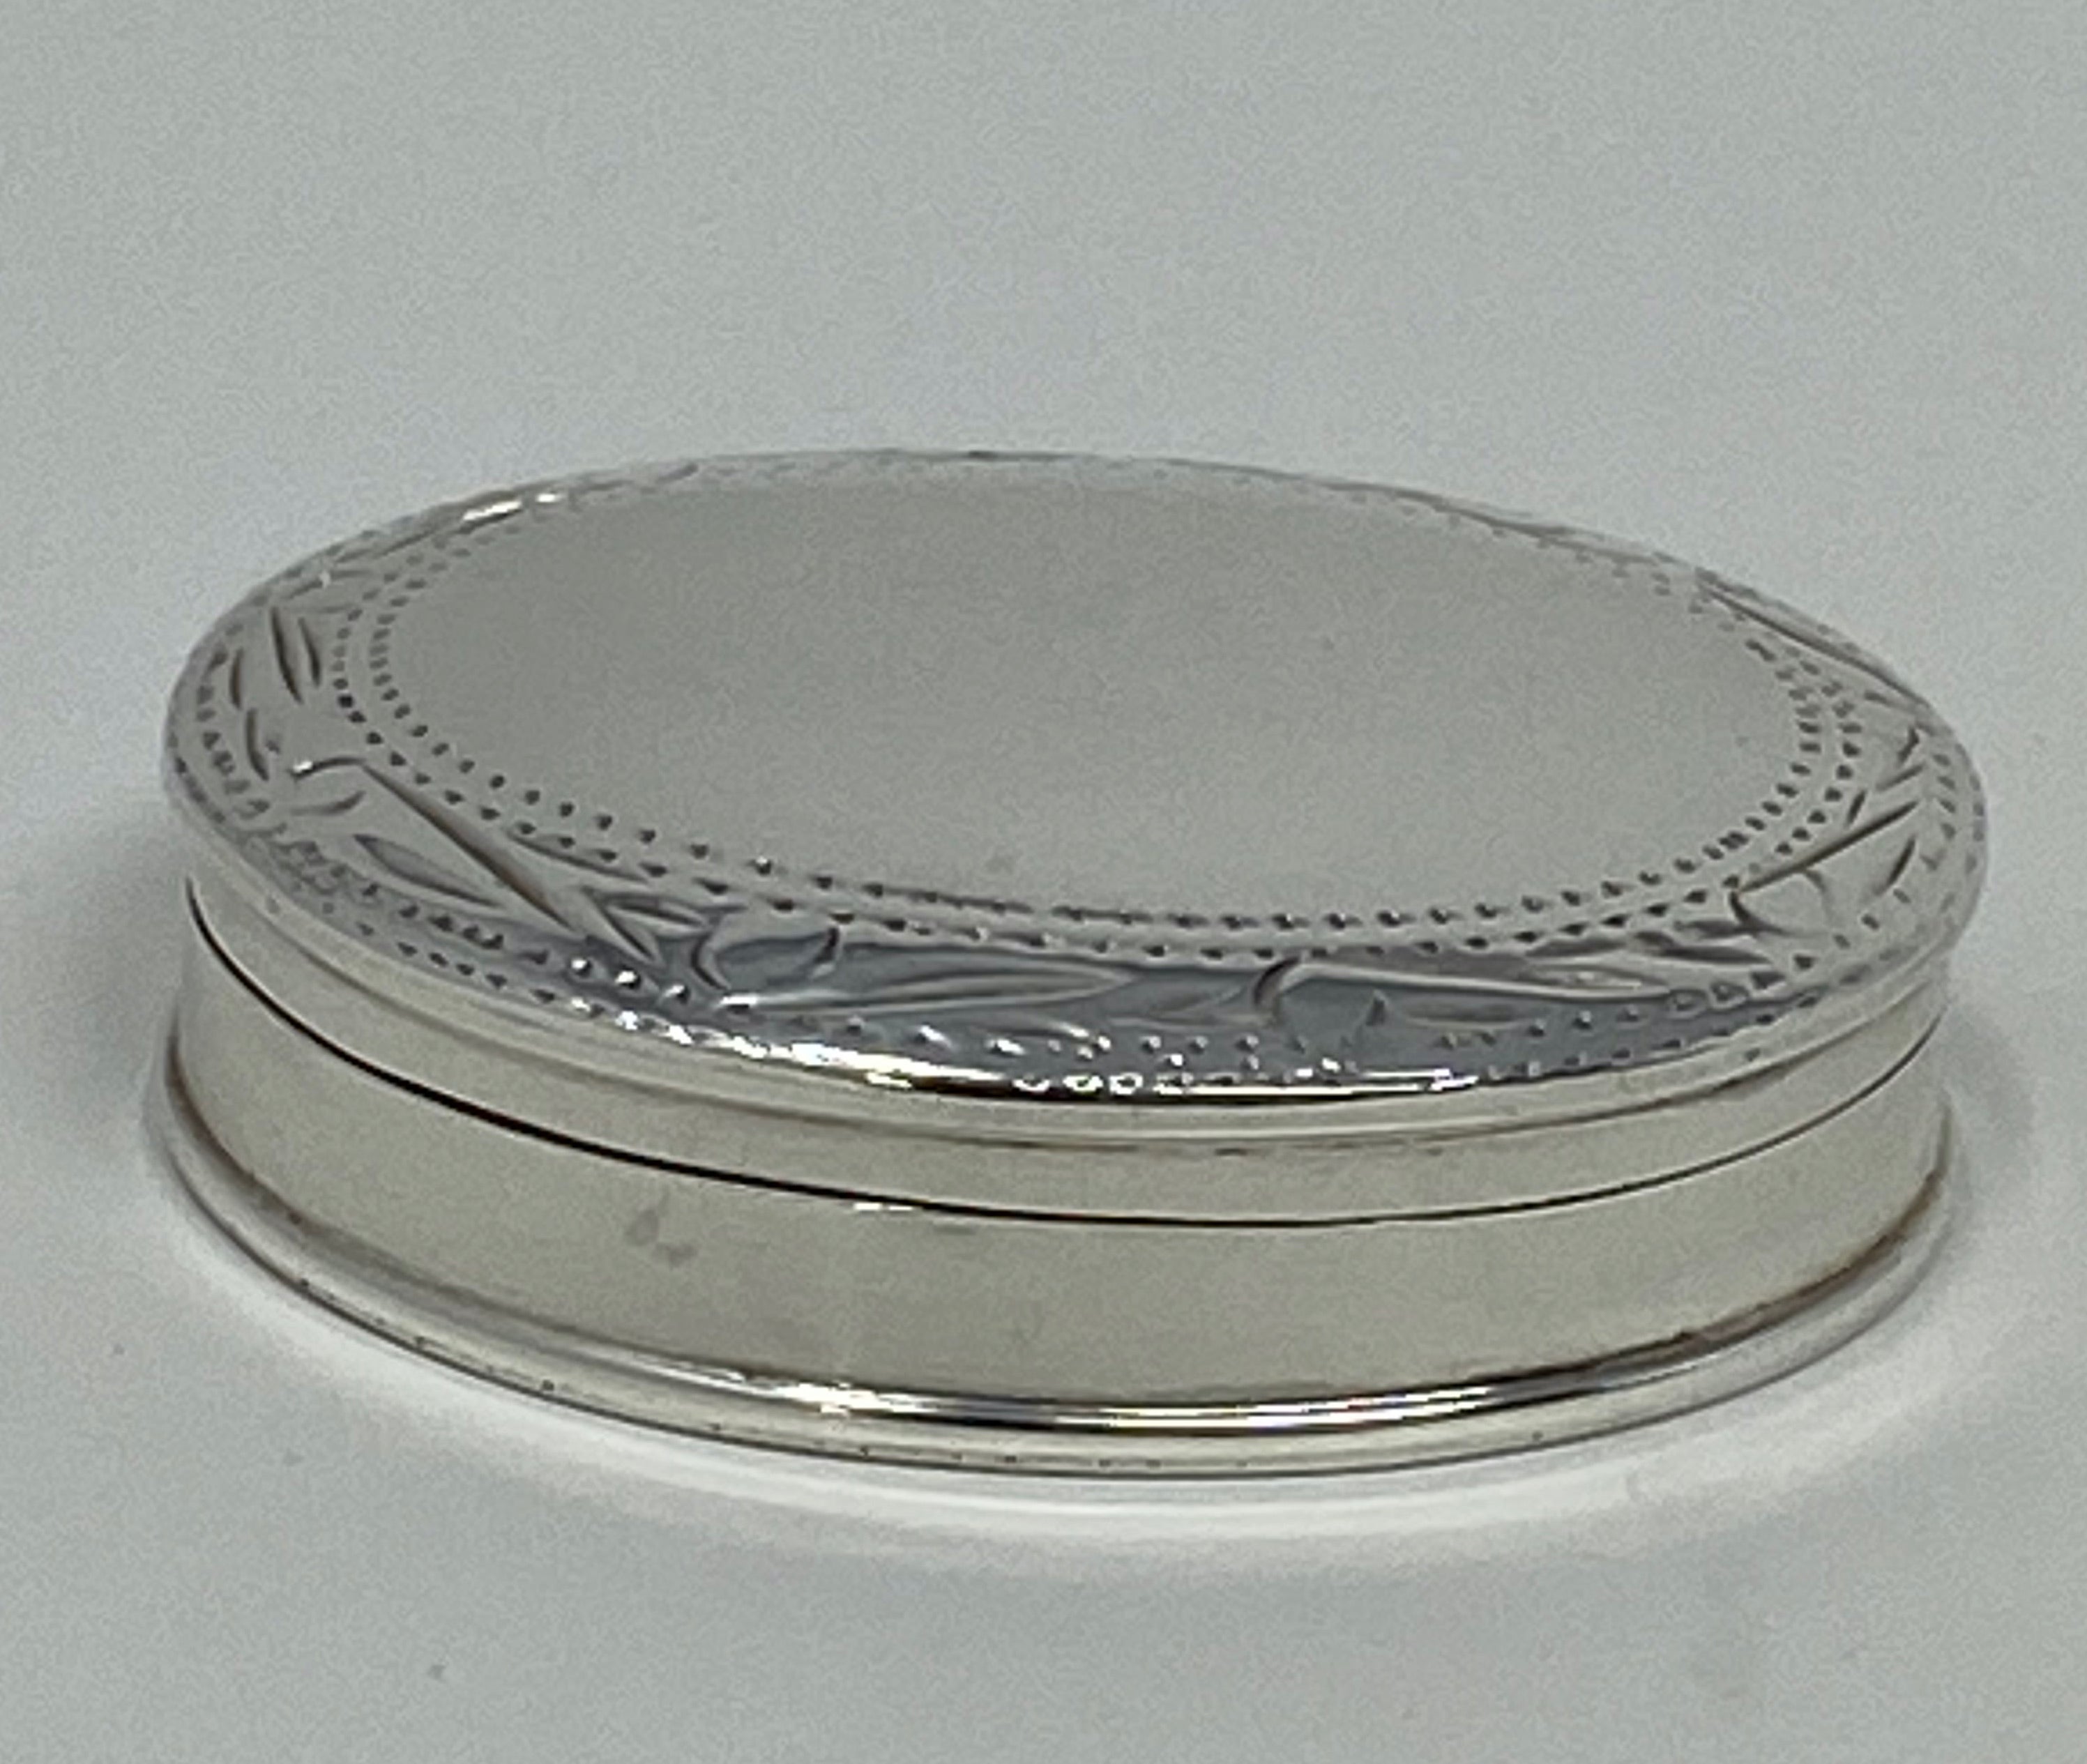 Silver Engraved Lid Pill Box